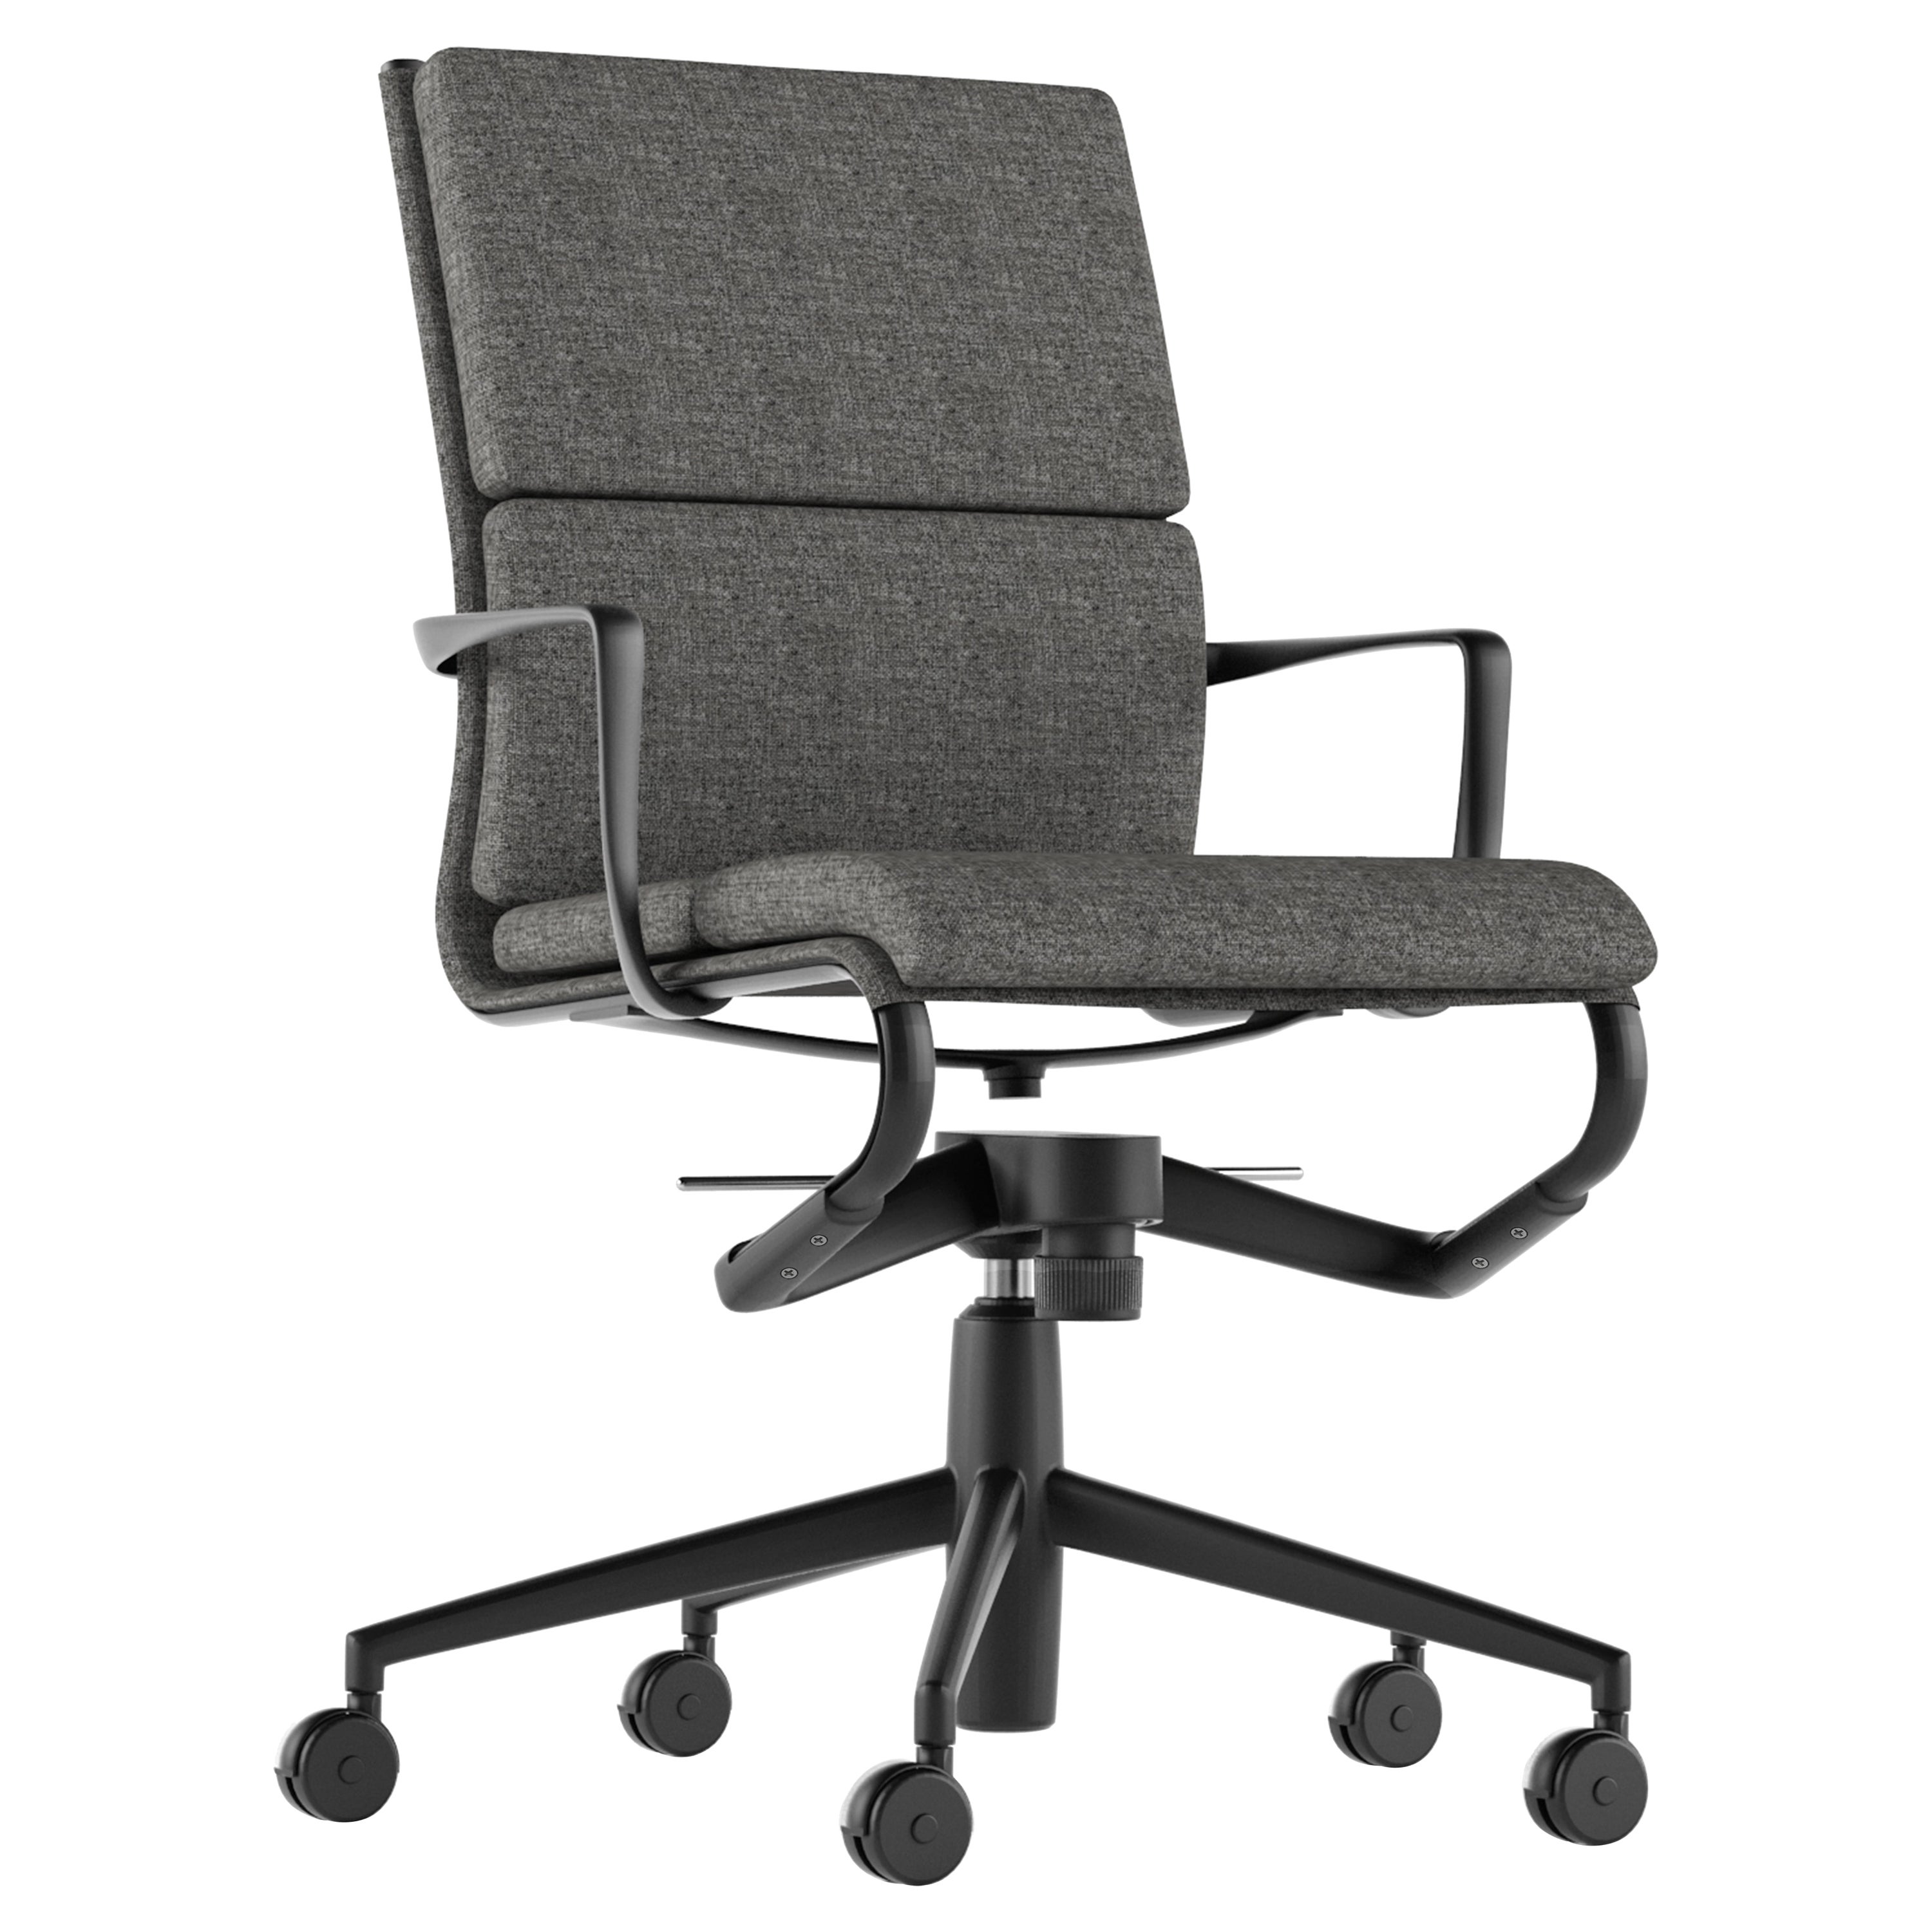 Alias 453 Rollingframe+ Tilt 47 Soft Chair in Grey with Lacquered Aluminum Frame